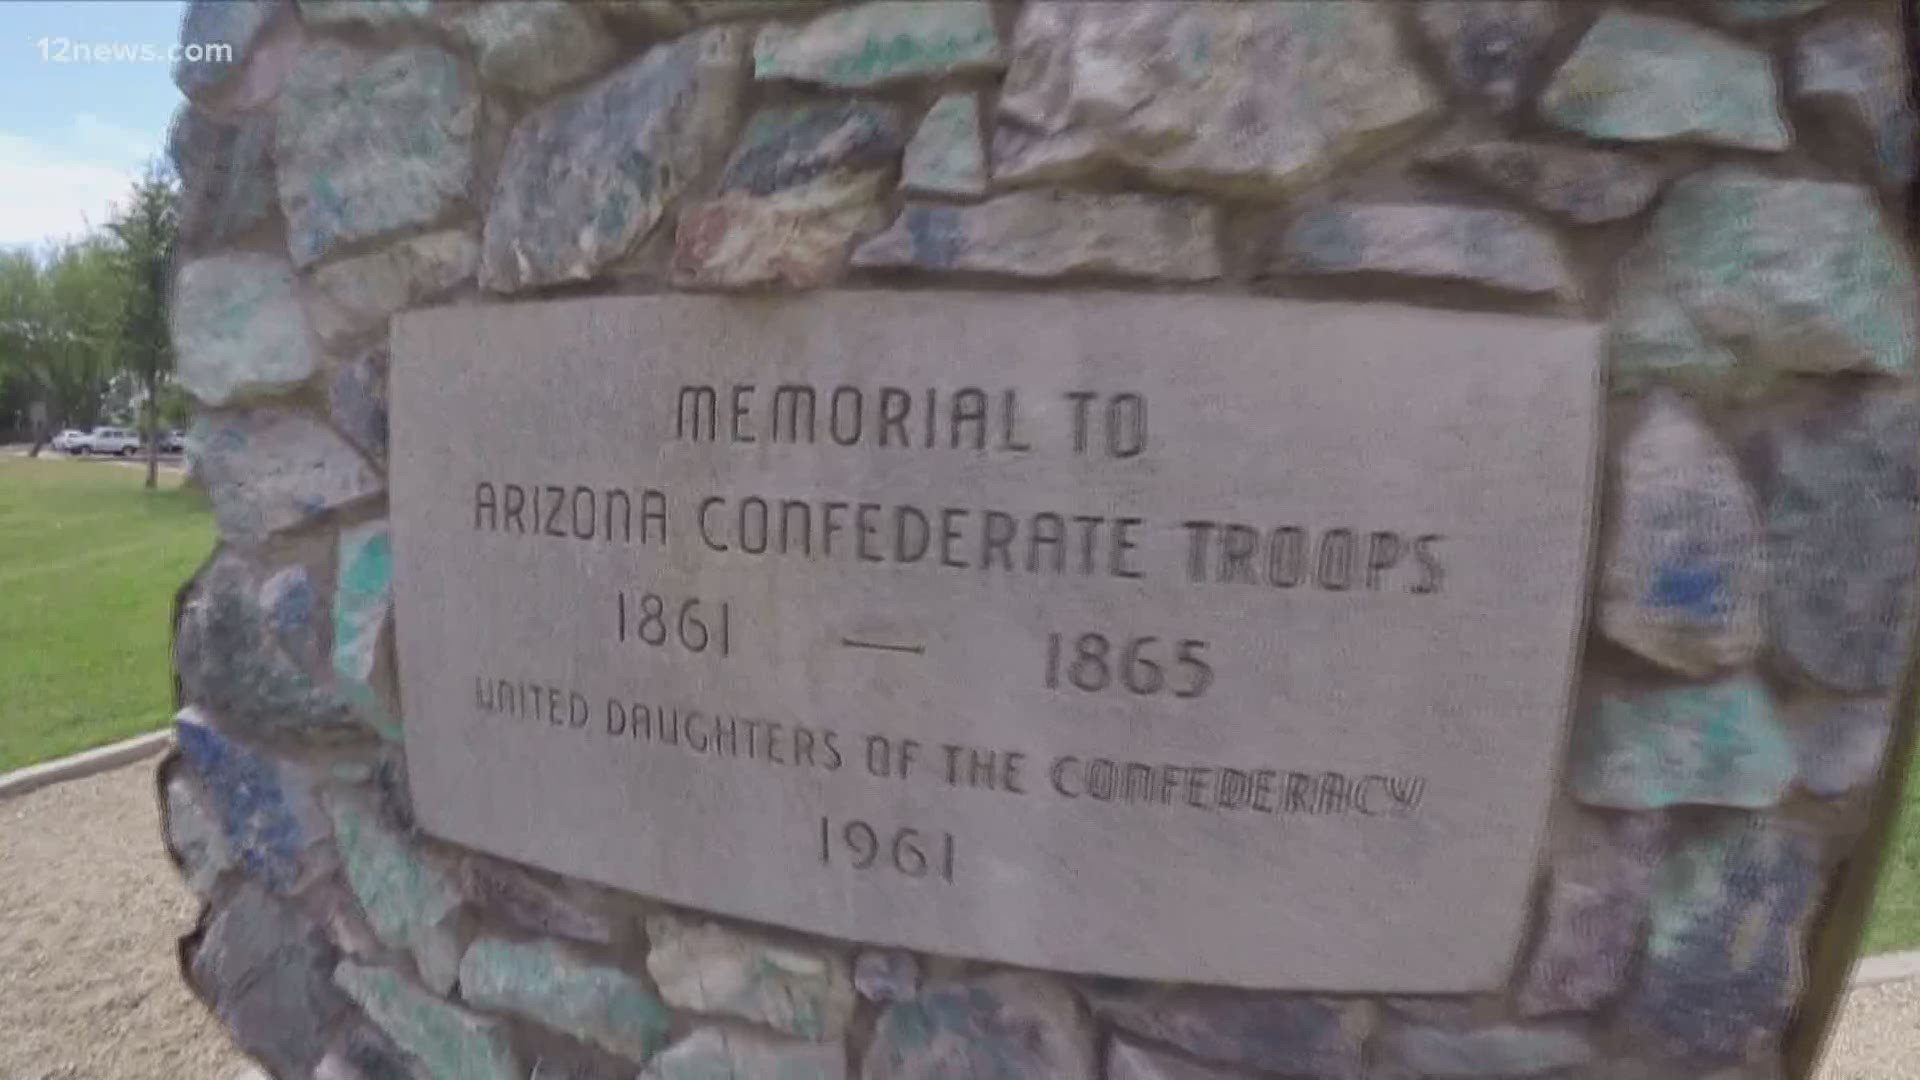 Arizona's Secretary of State is urging leaders to remove a Confederate monument at the state capitol. She says it has become a symbol of divisiveness.